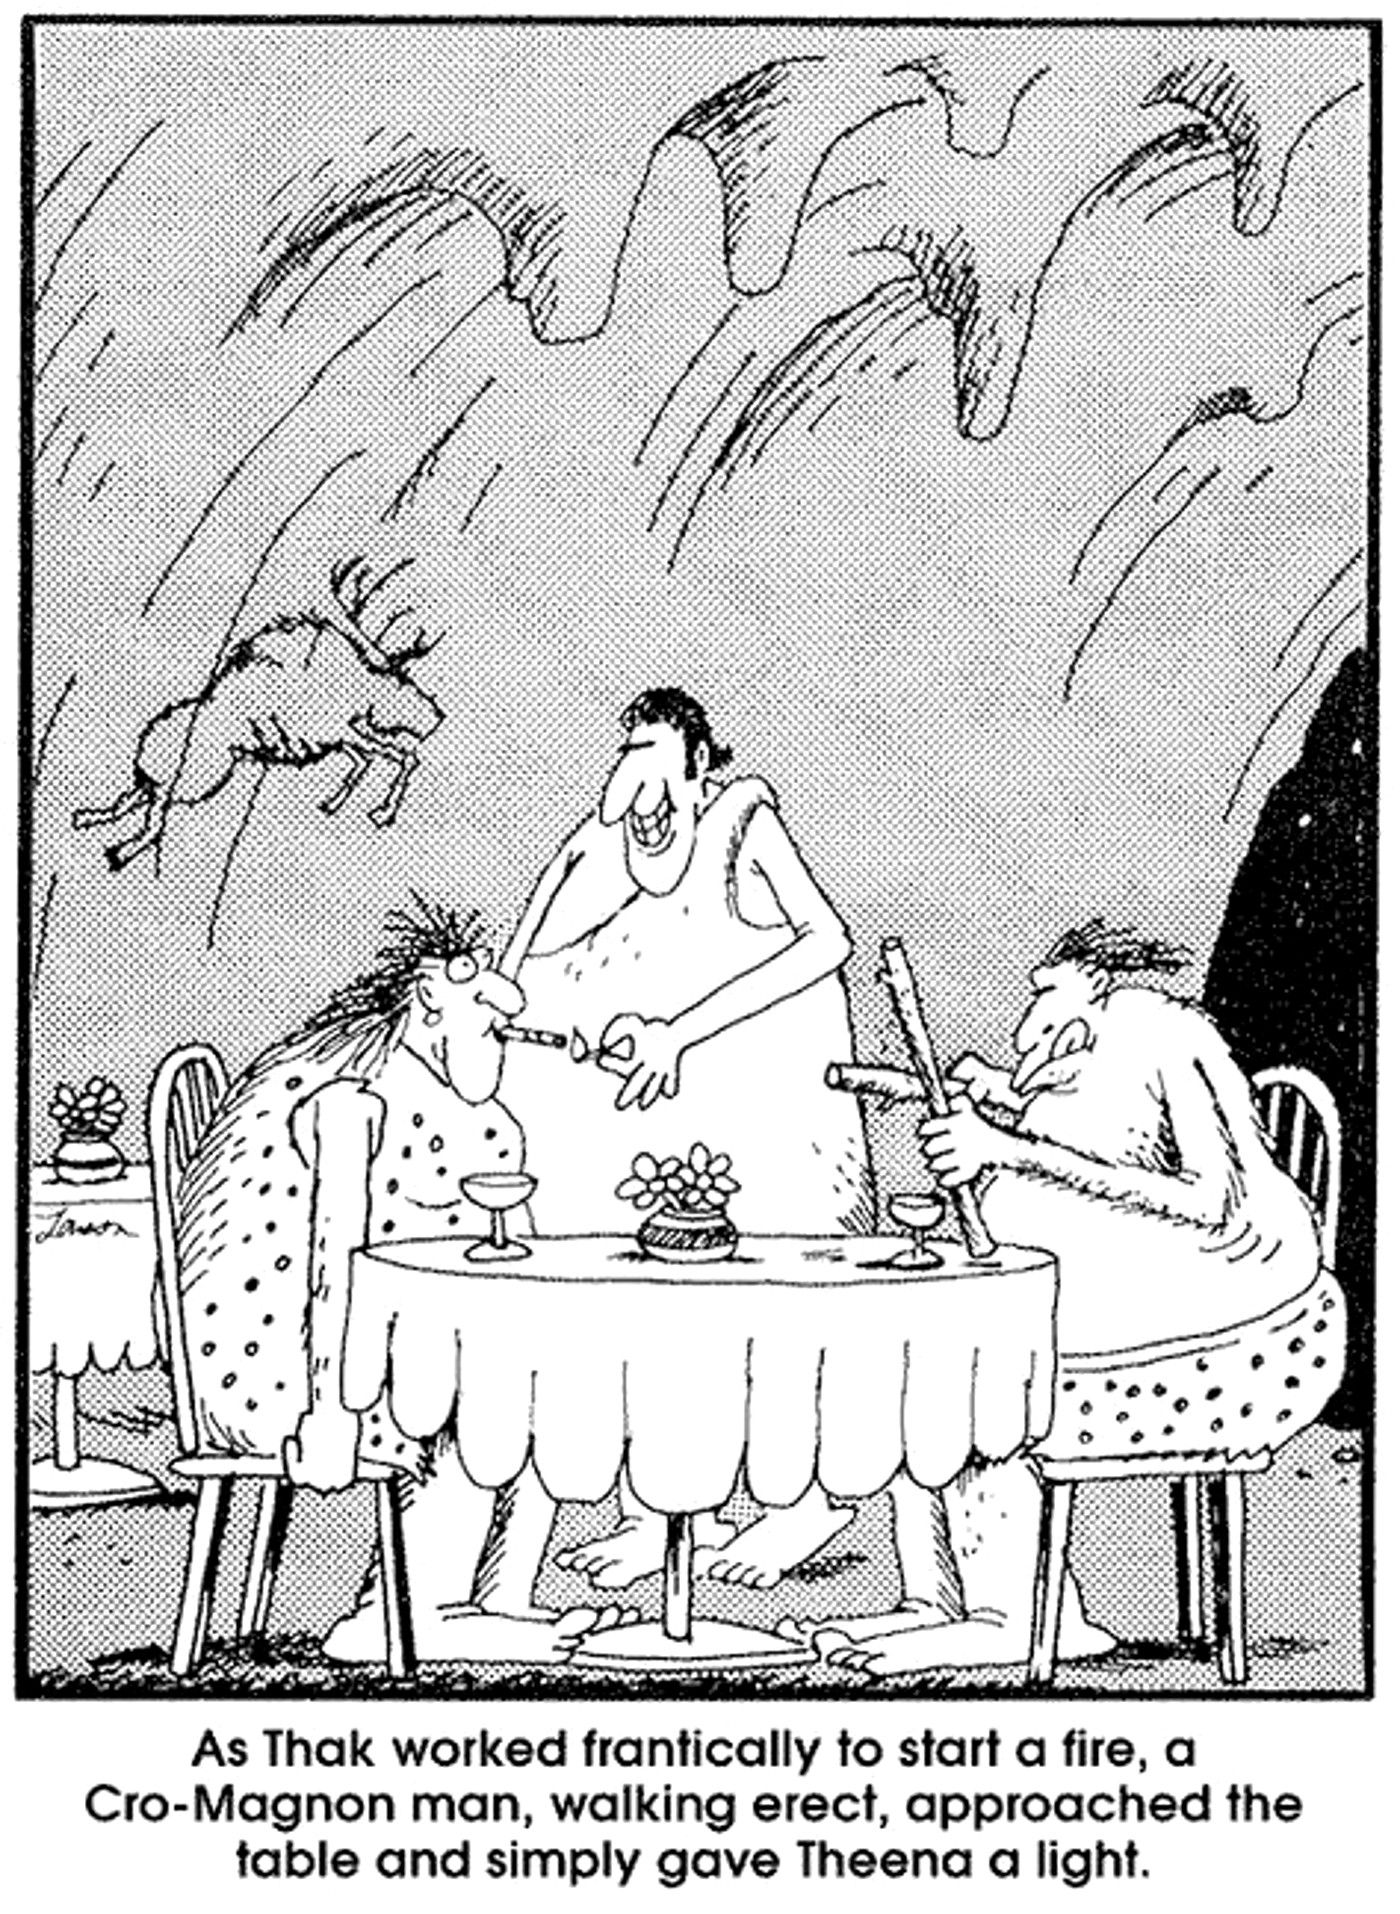 the far side caveman can't start a fire as a rival neanderthal offers a lighter